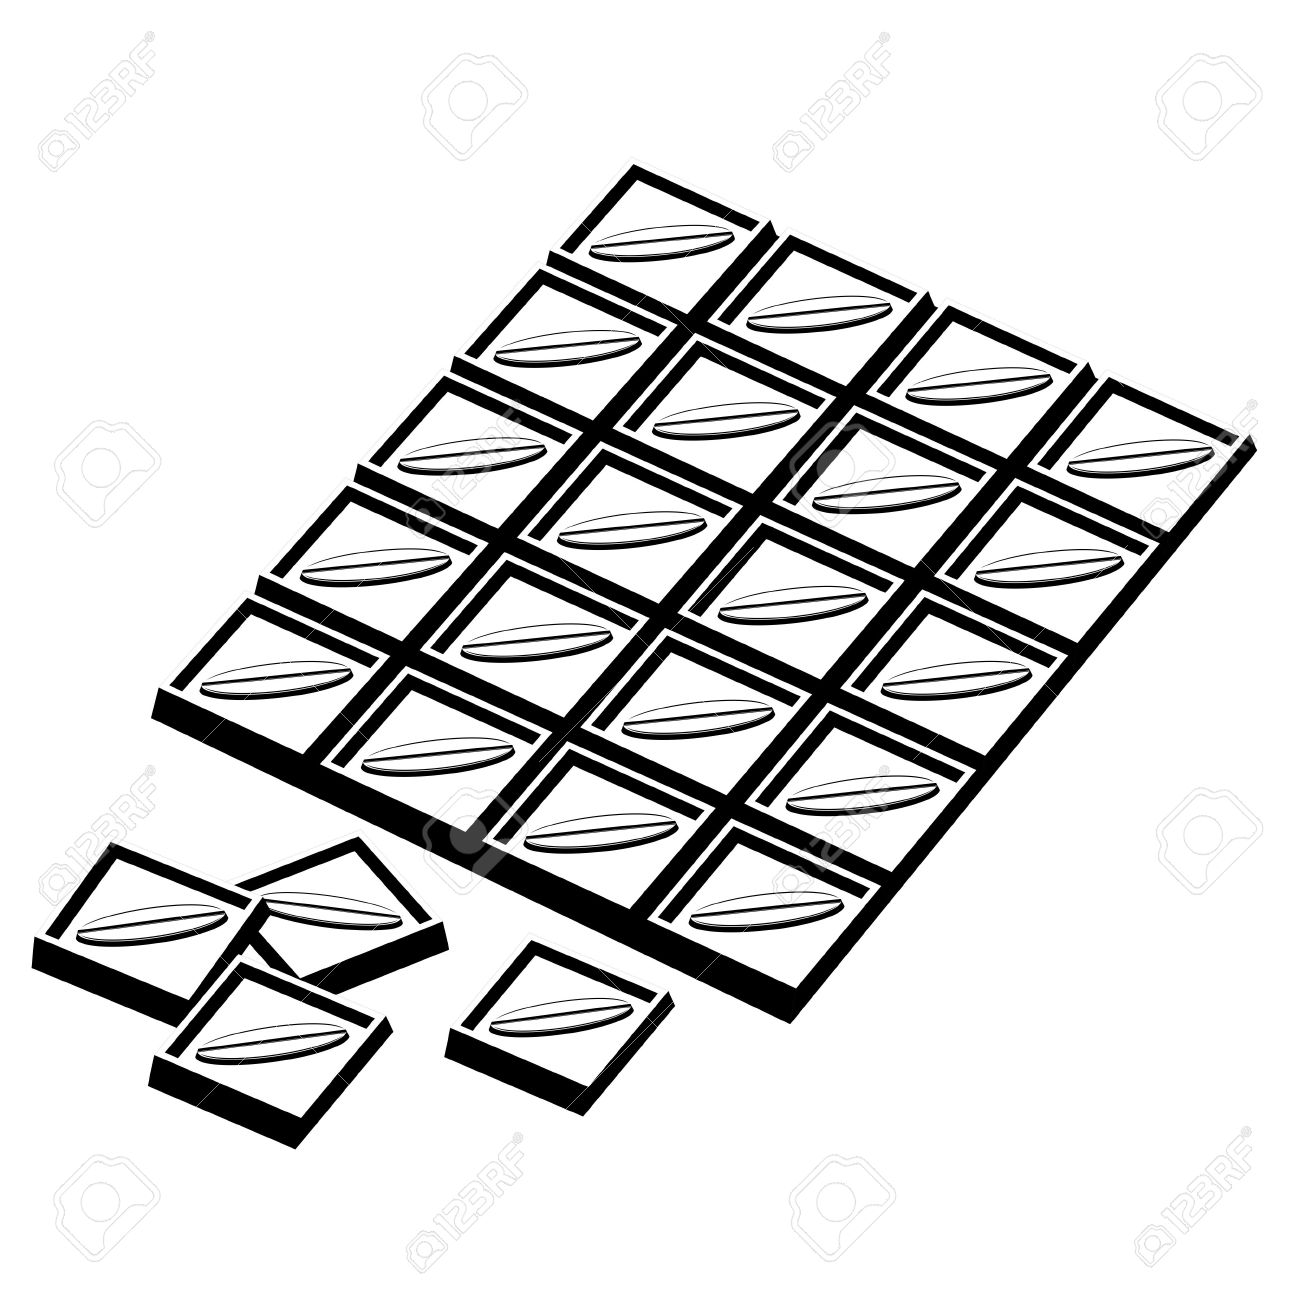 Chocolate bar clipart black and white